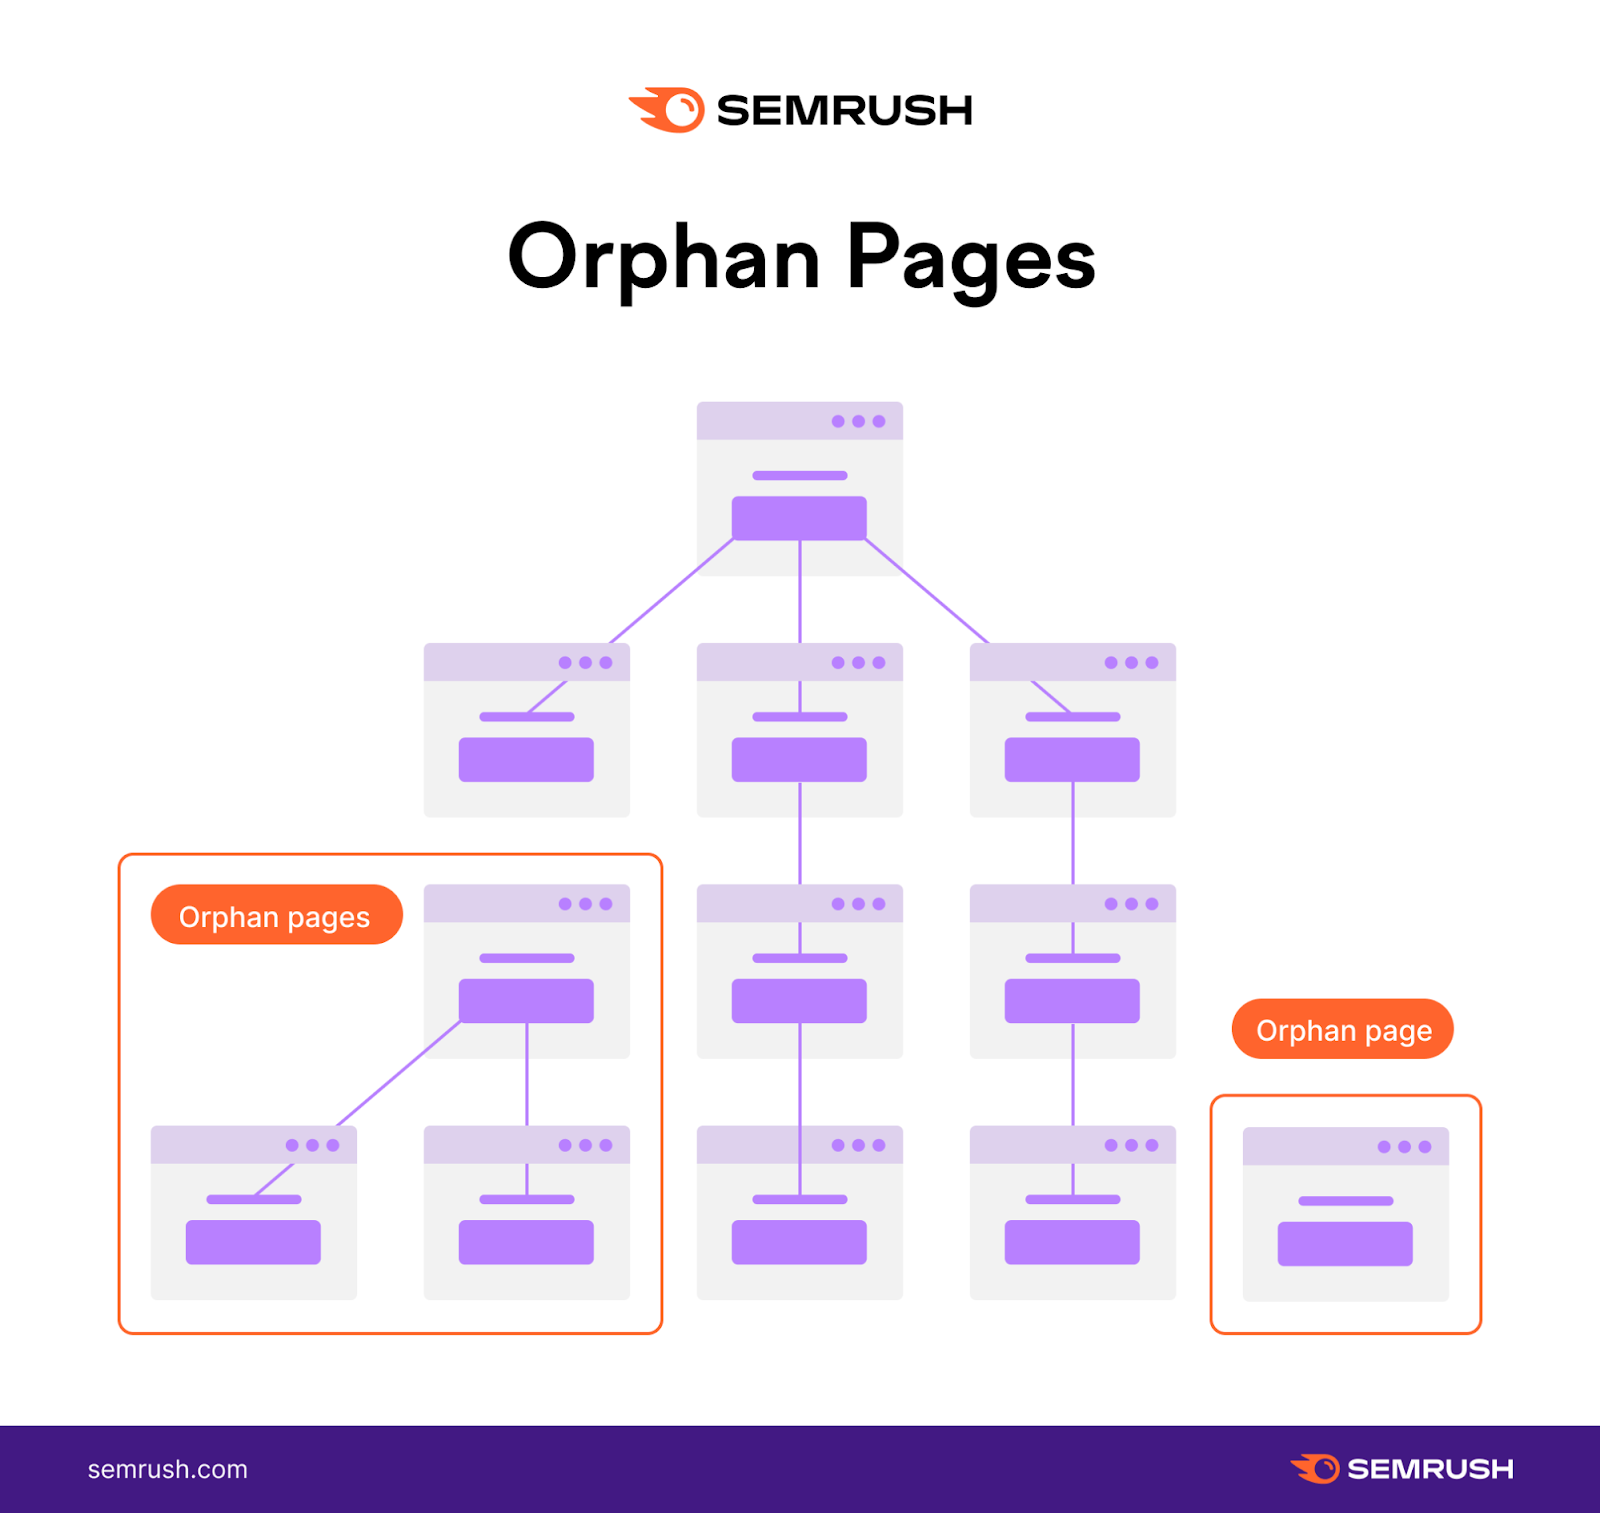 An infographic showing orphan pages